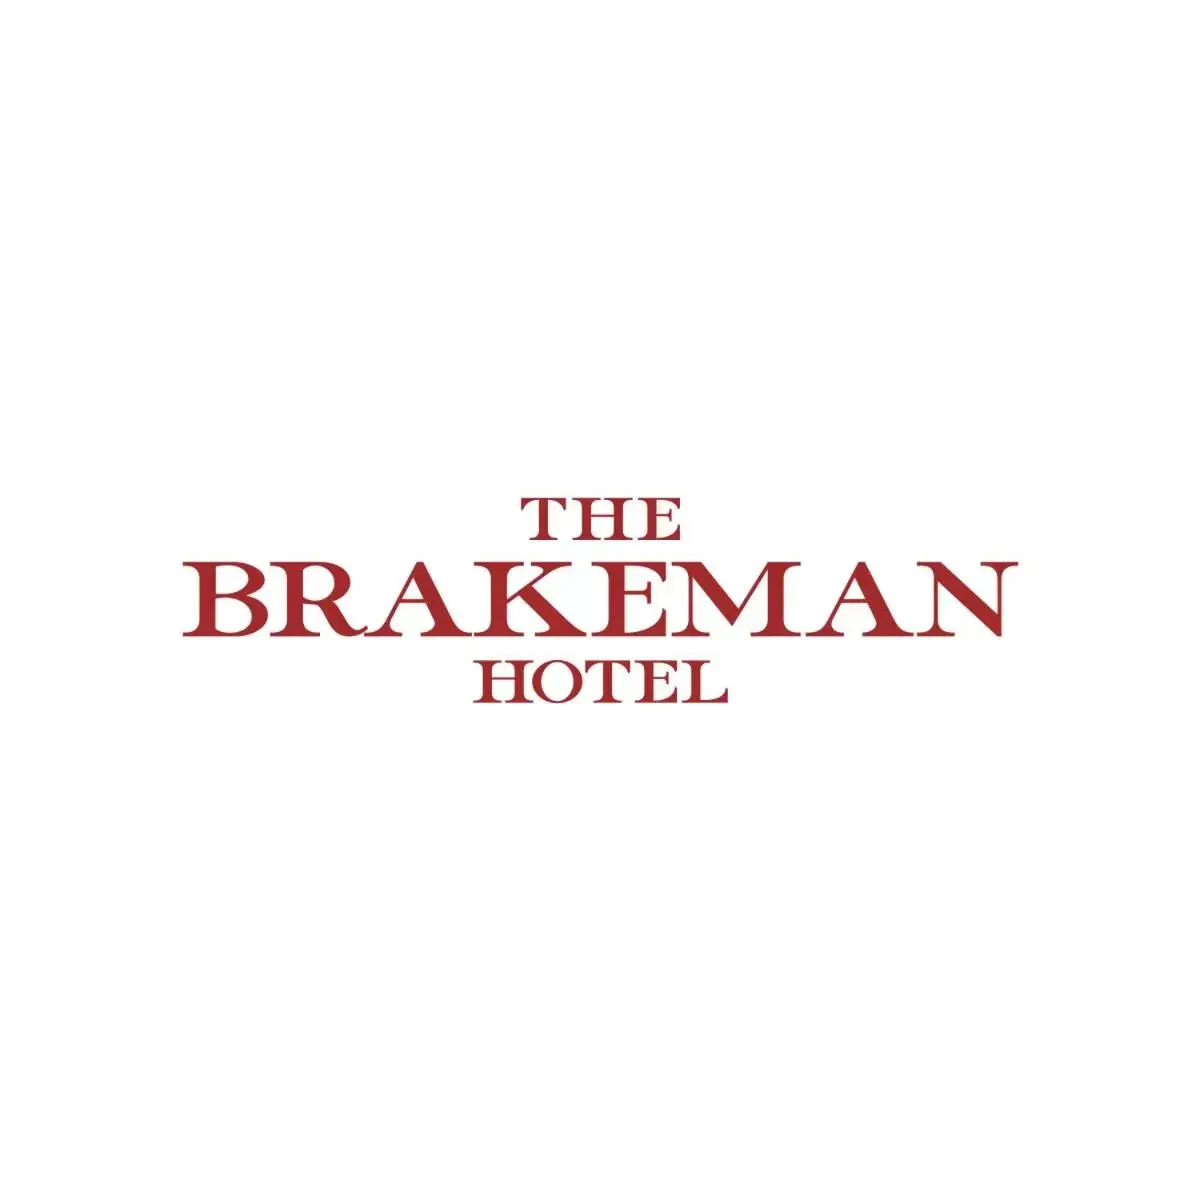 Property logo or sign in The Brakeman Hotel